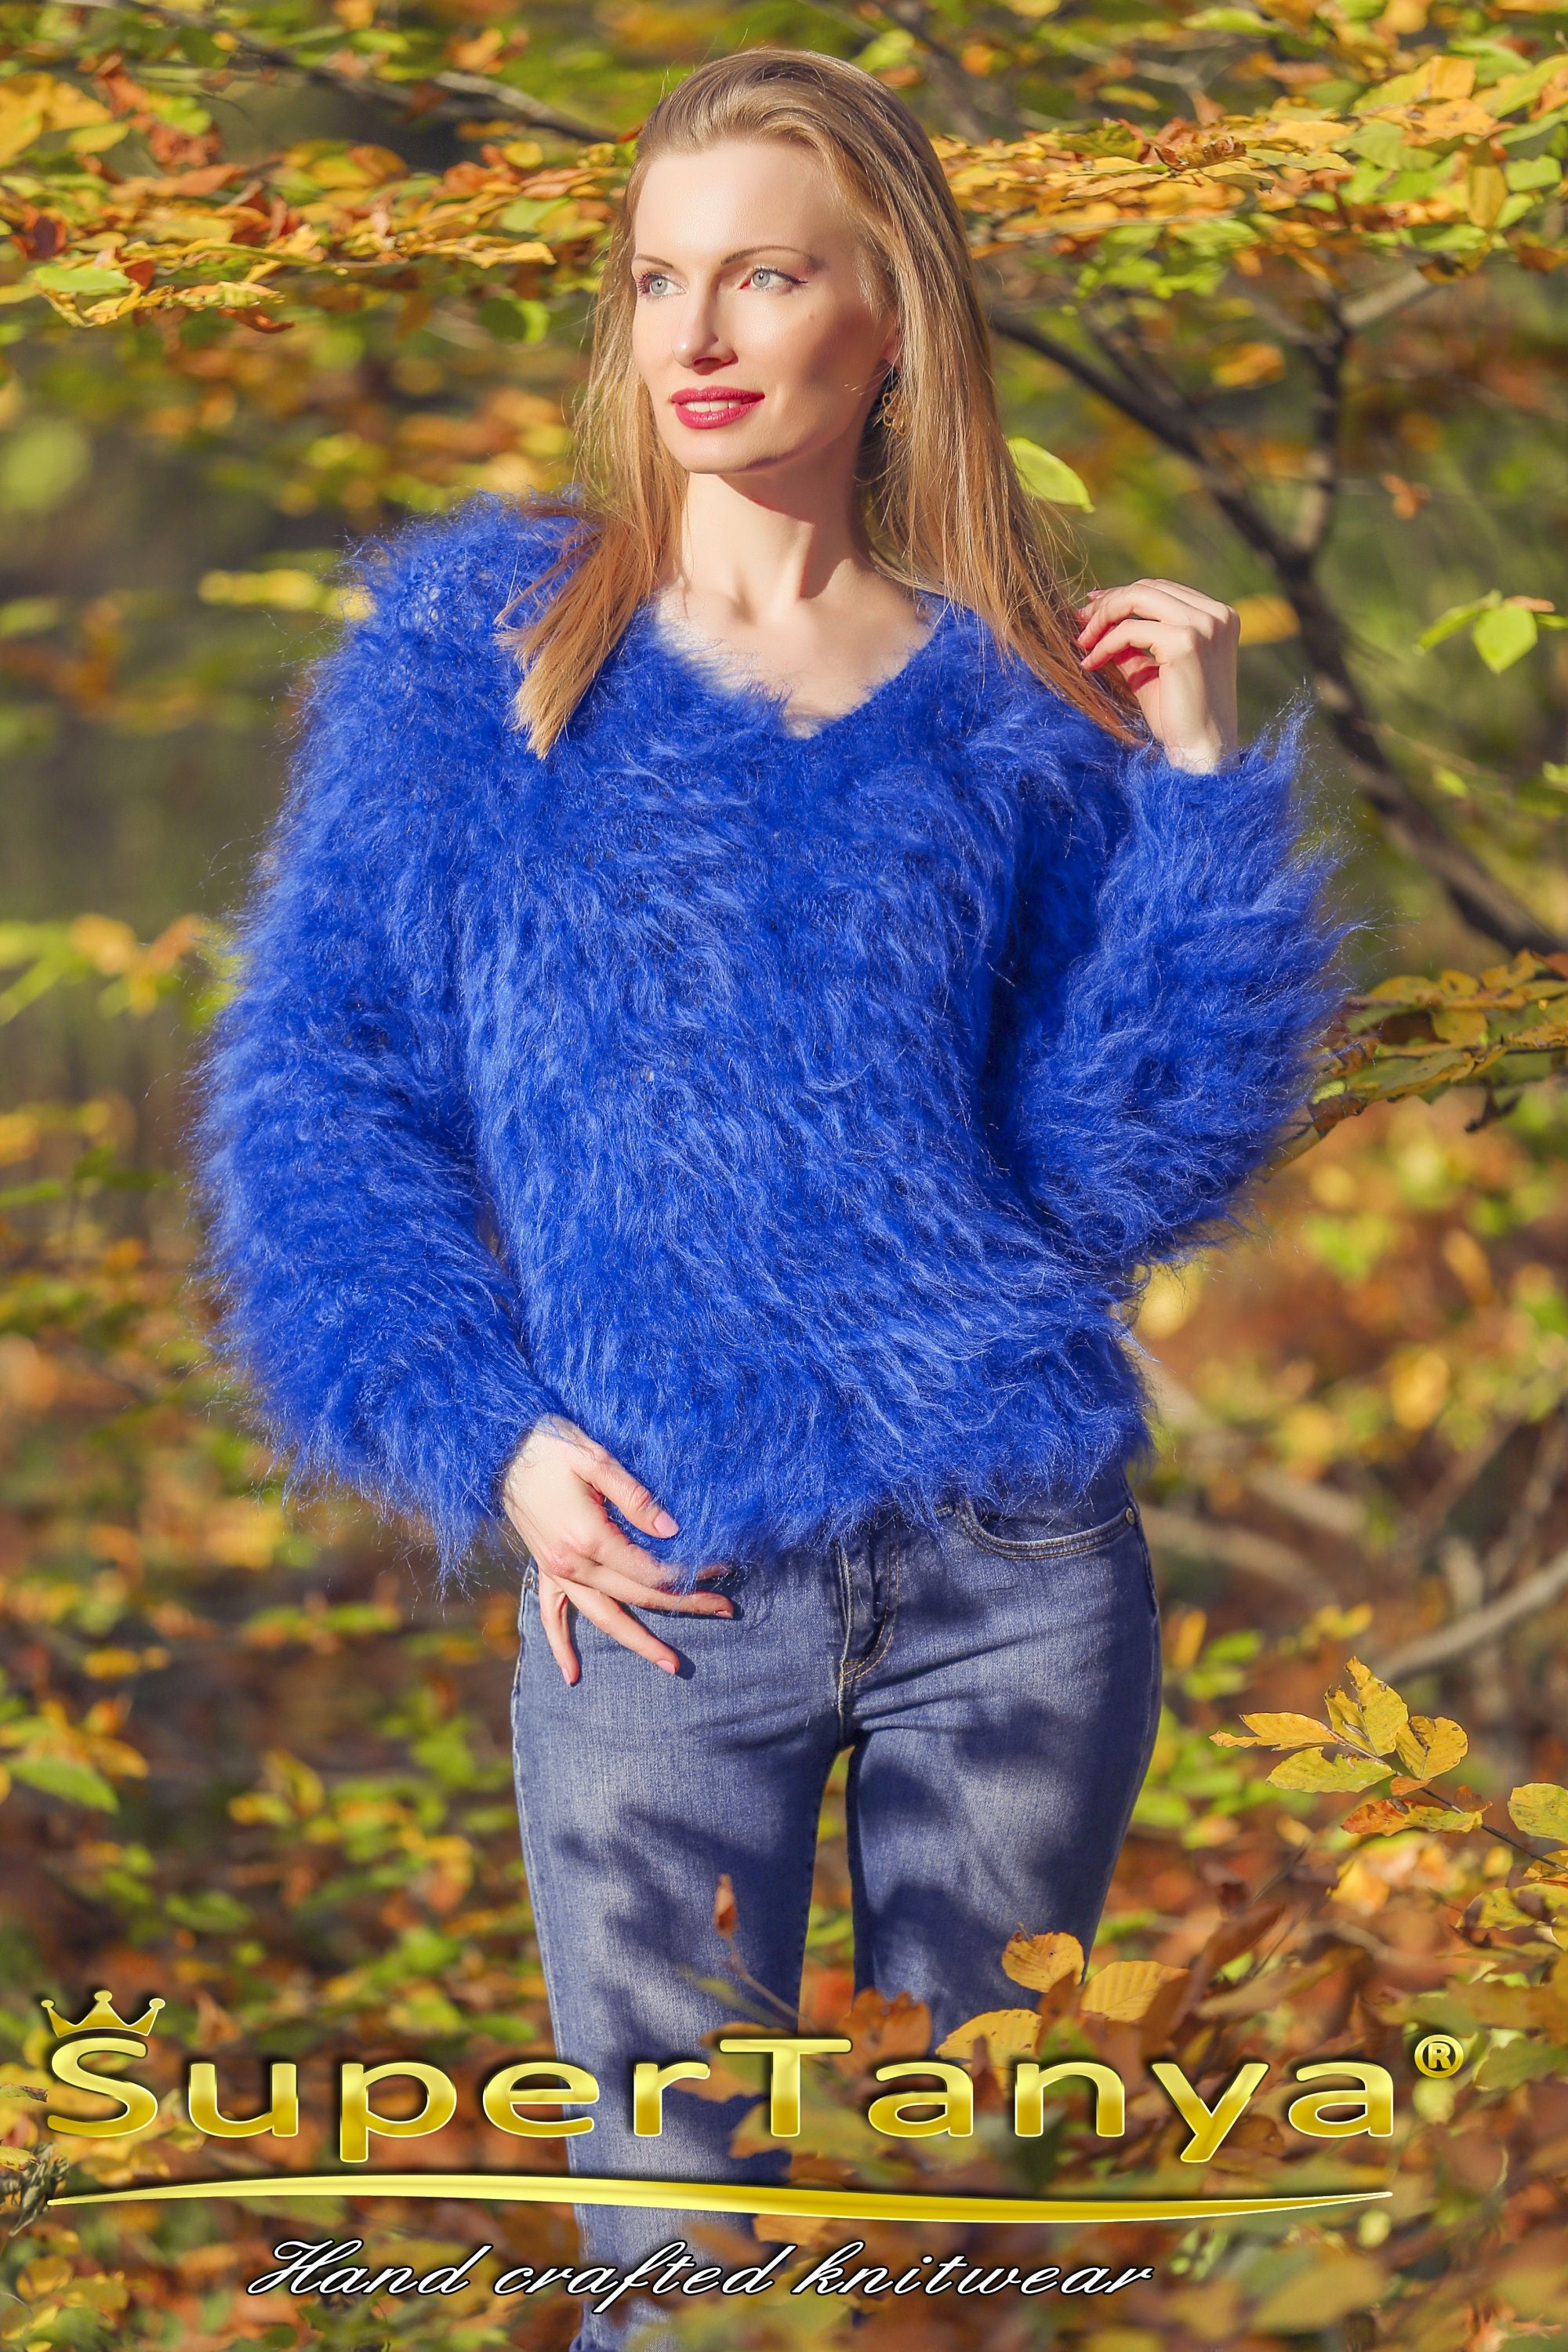 Fuzzy Mohair Sweater V Neck Fluffy Top Hand Knitted Jumper by